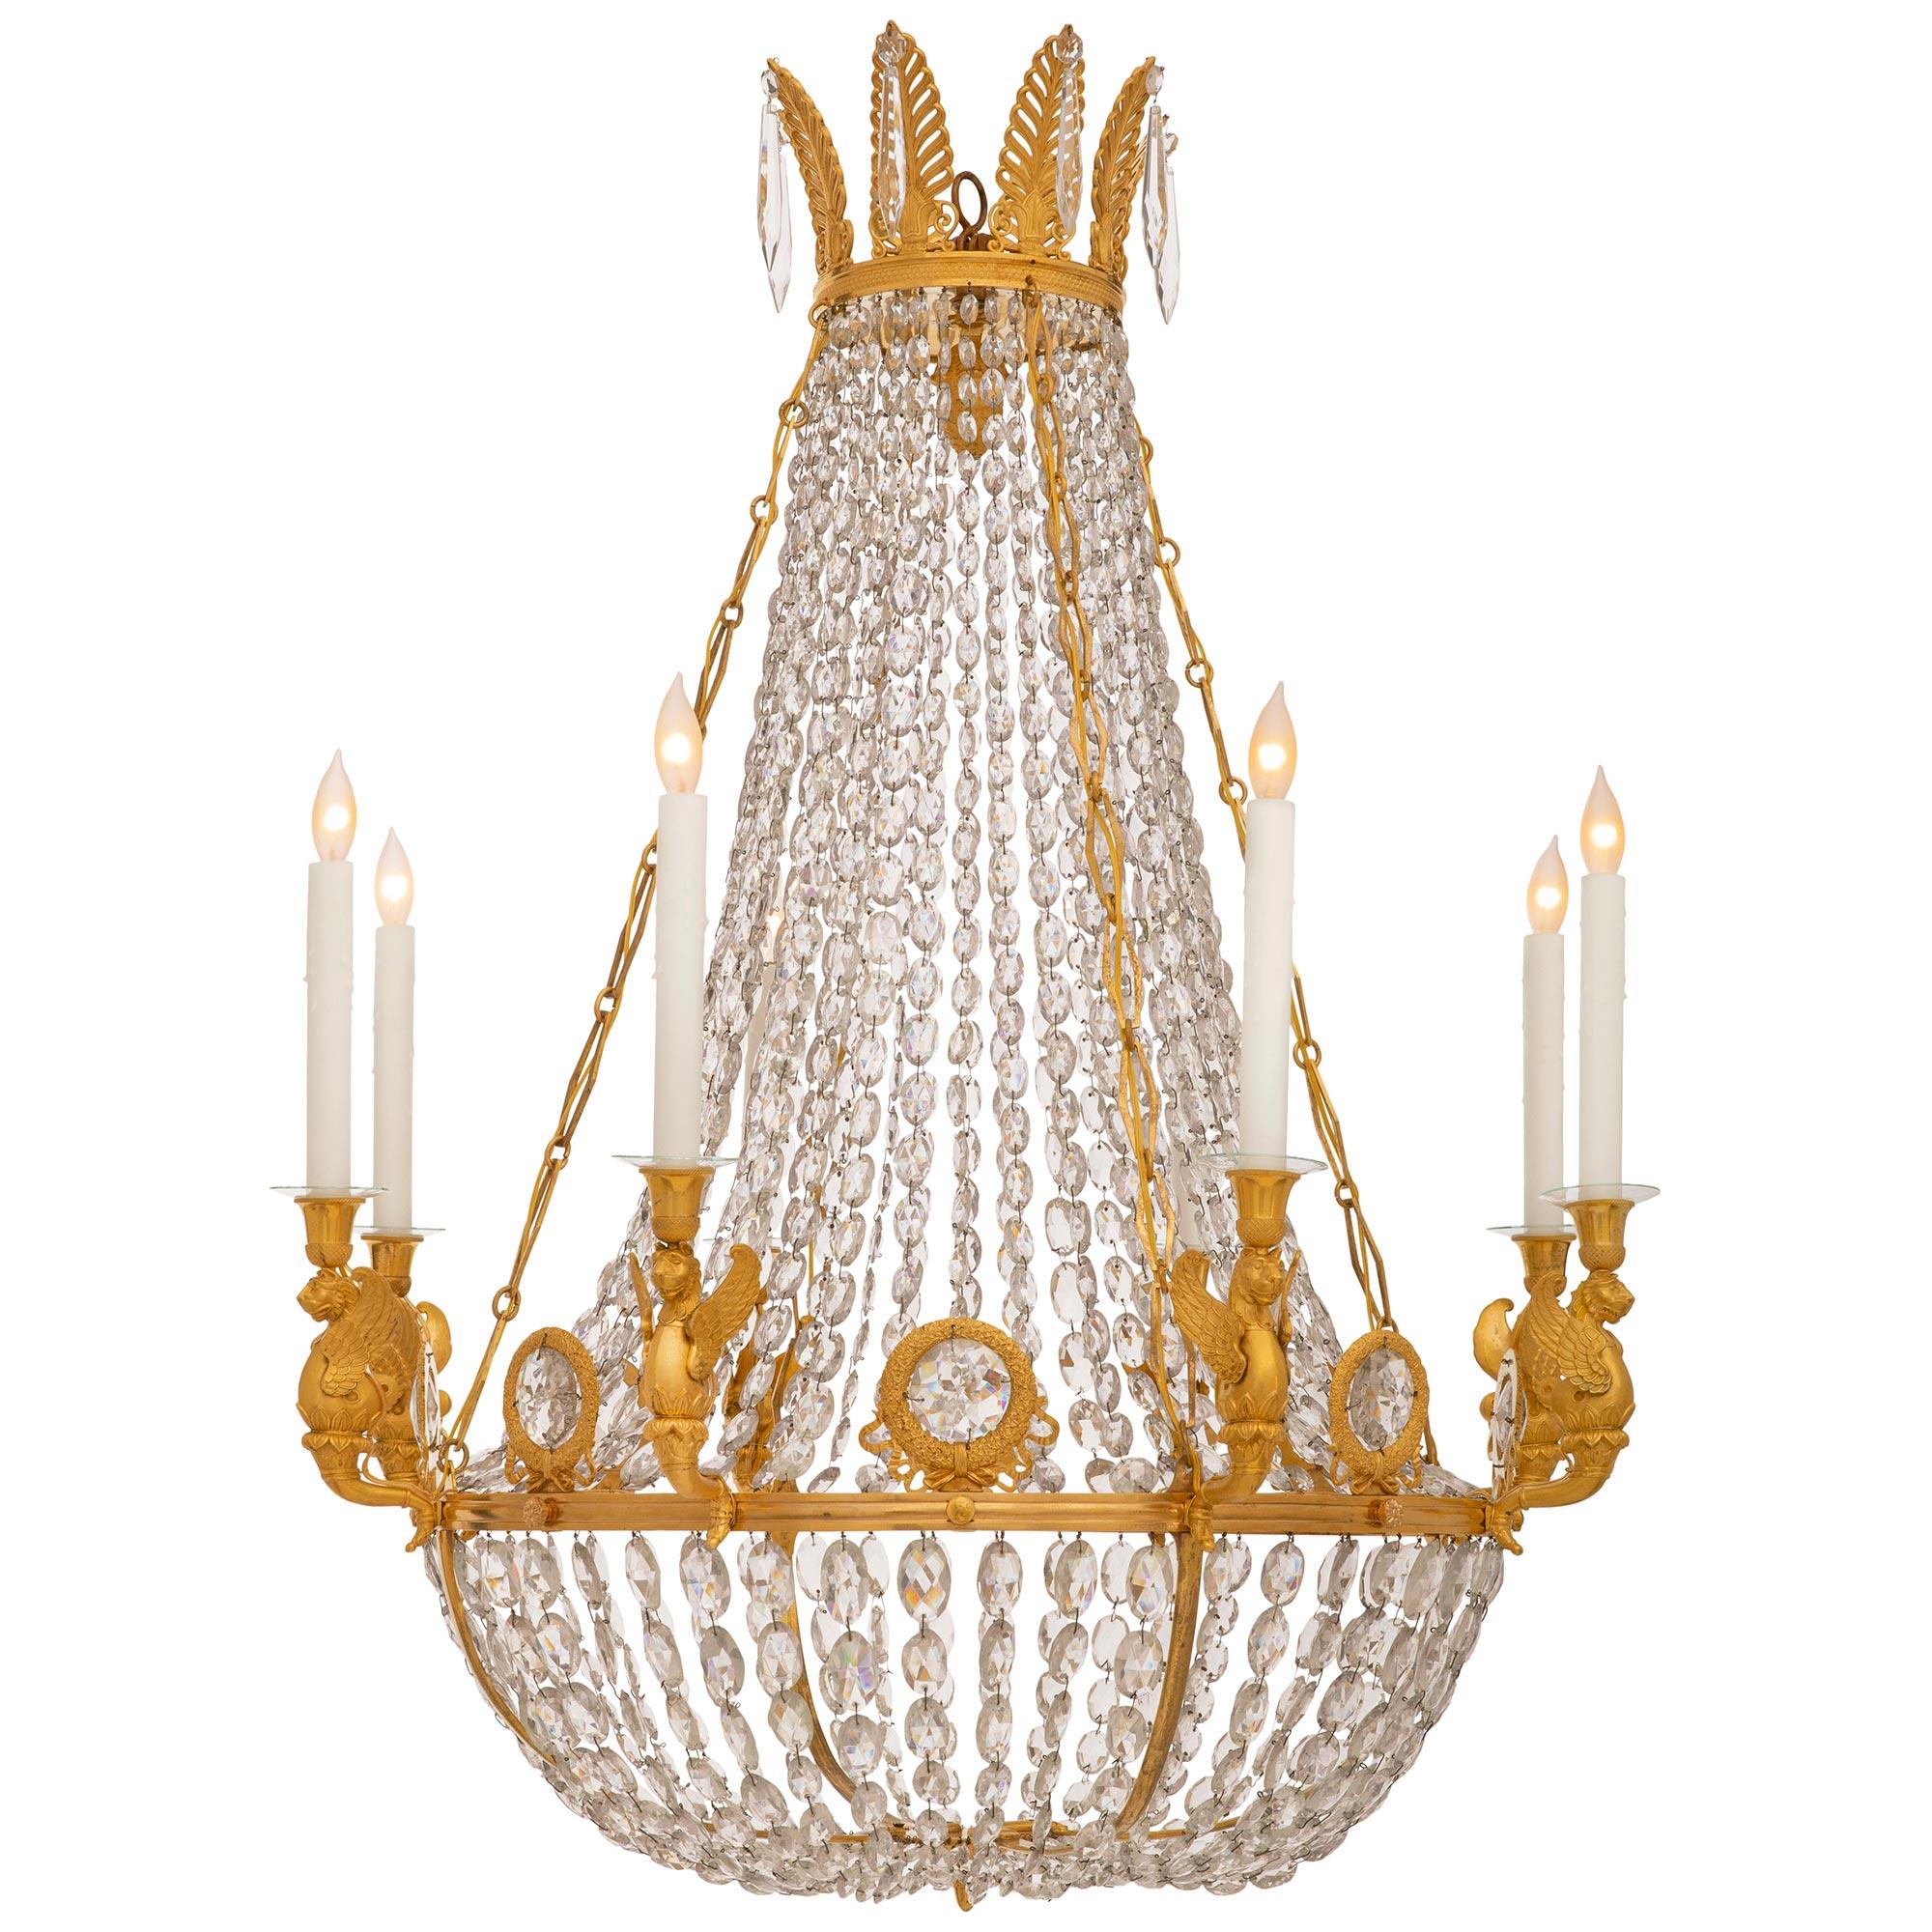 A stunning and most elegant French 19th century Charles X st. Ormolu and Crystal chandelier. This impressive eight light chandelier is centered at the bottom by a circular Ormolu reserve decorated by acanthus leaves and lattice patterns surrounding